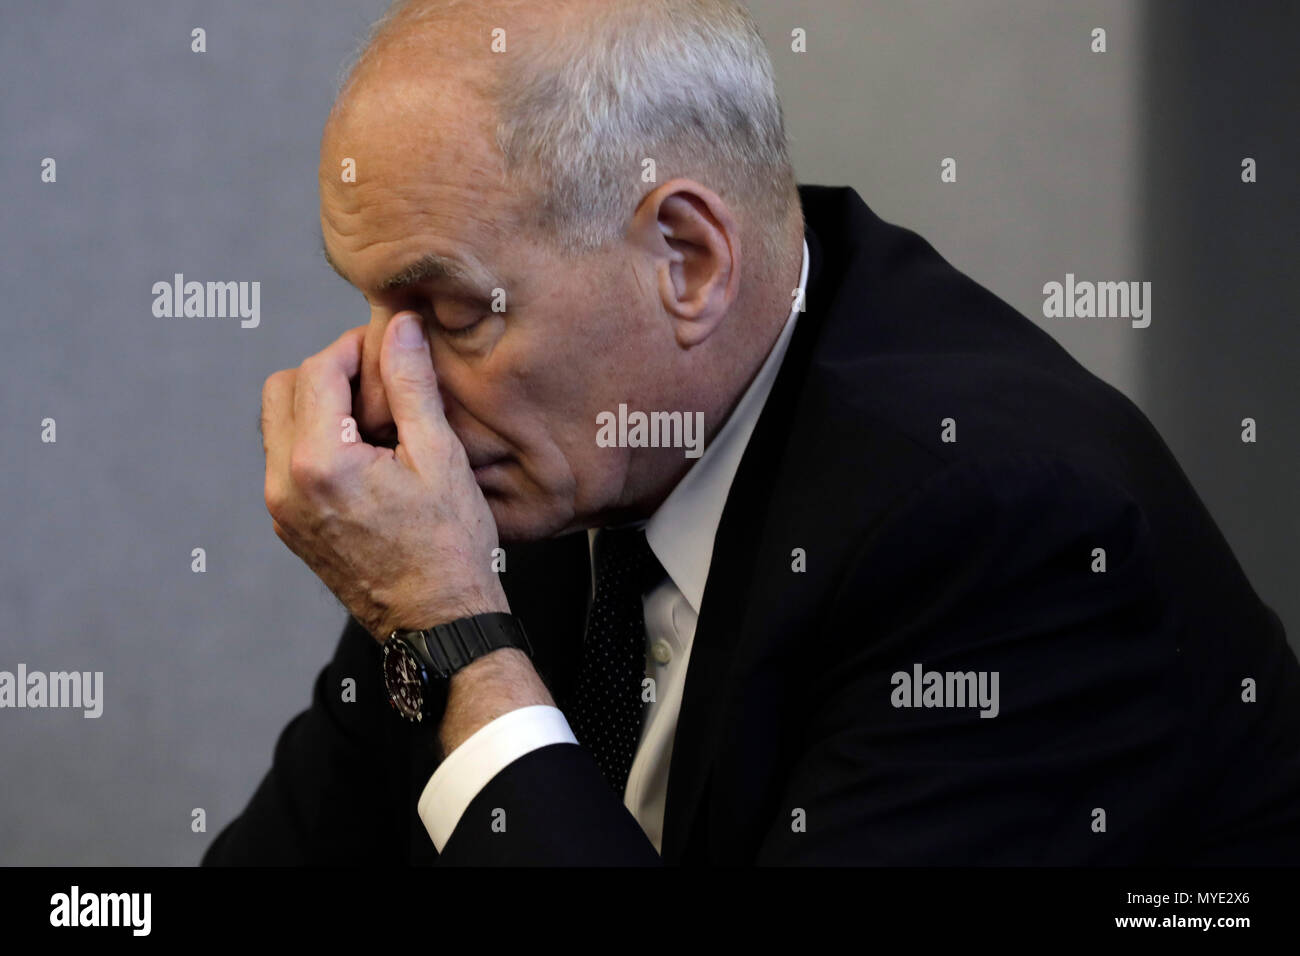 Washington, DC. 6th June, 2018. White House Chief of Staff John Kelly attends the 2018 Hurricane Briefing at the Federal Emergency Management Agency Headquarters on June 6, 2018 in Washington, DC. Credit: Yuri Gripas/Pool via CNP | usage worldwide Credit: dpa/Alamy Live News Stock Photo